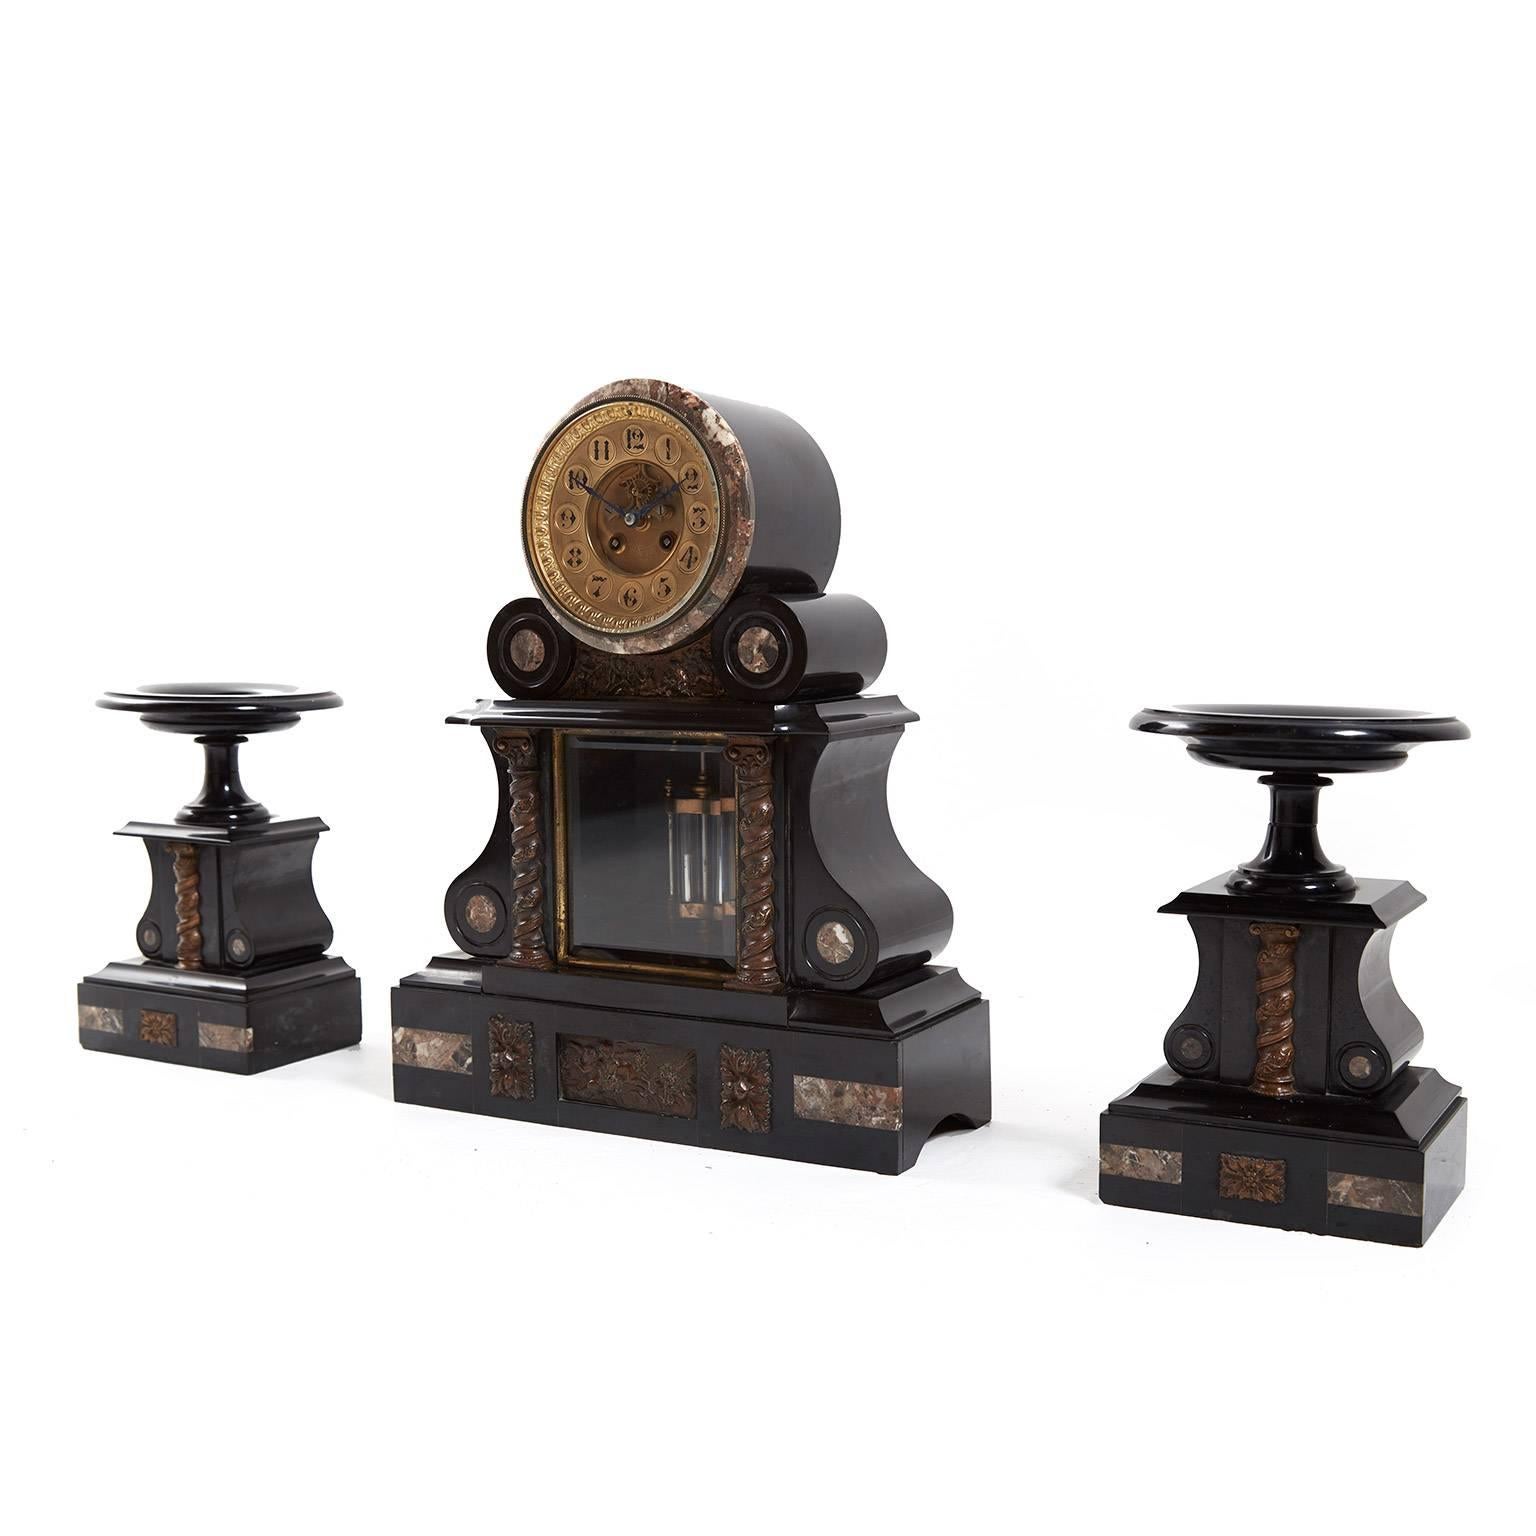 Antique French marble and bronze mantel clock garniture set with two side pedestals, circa 1880.

Measures: Clock 15? wide x 5.5? deep x 19? tall.
Pedestals 7.5? wide x 7.5? deep x 10.5? tall.

               